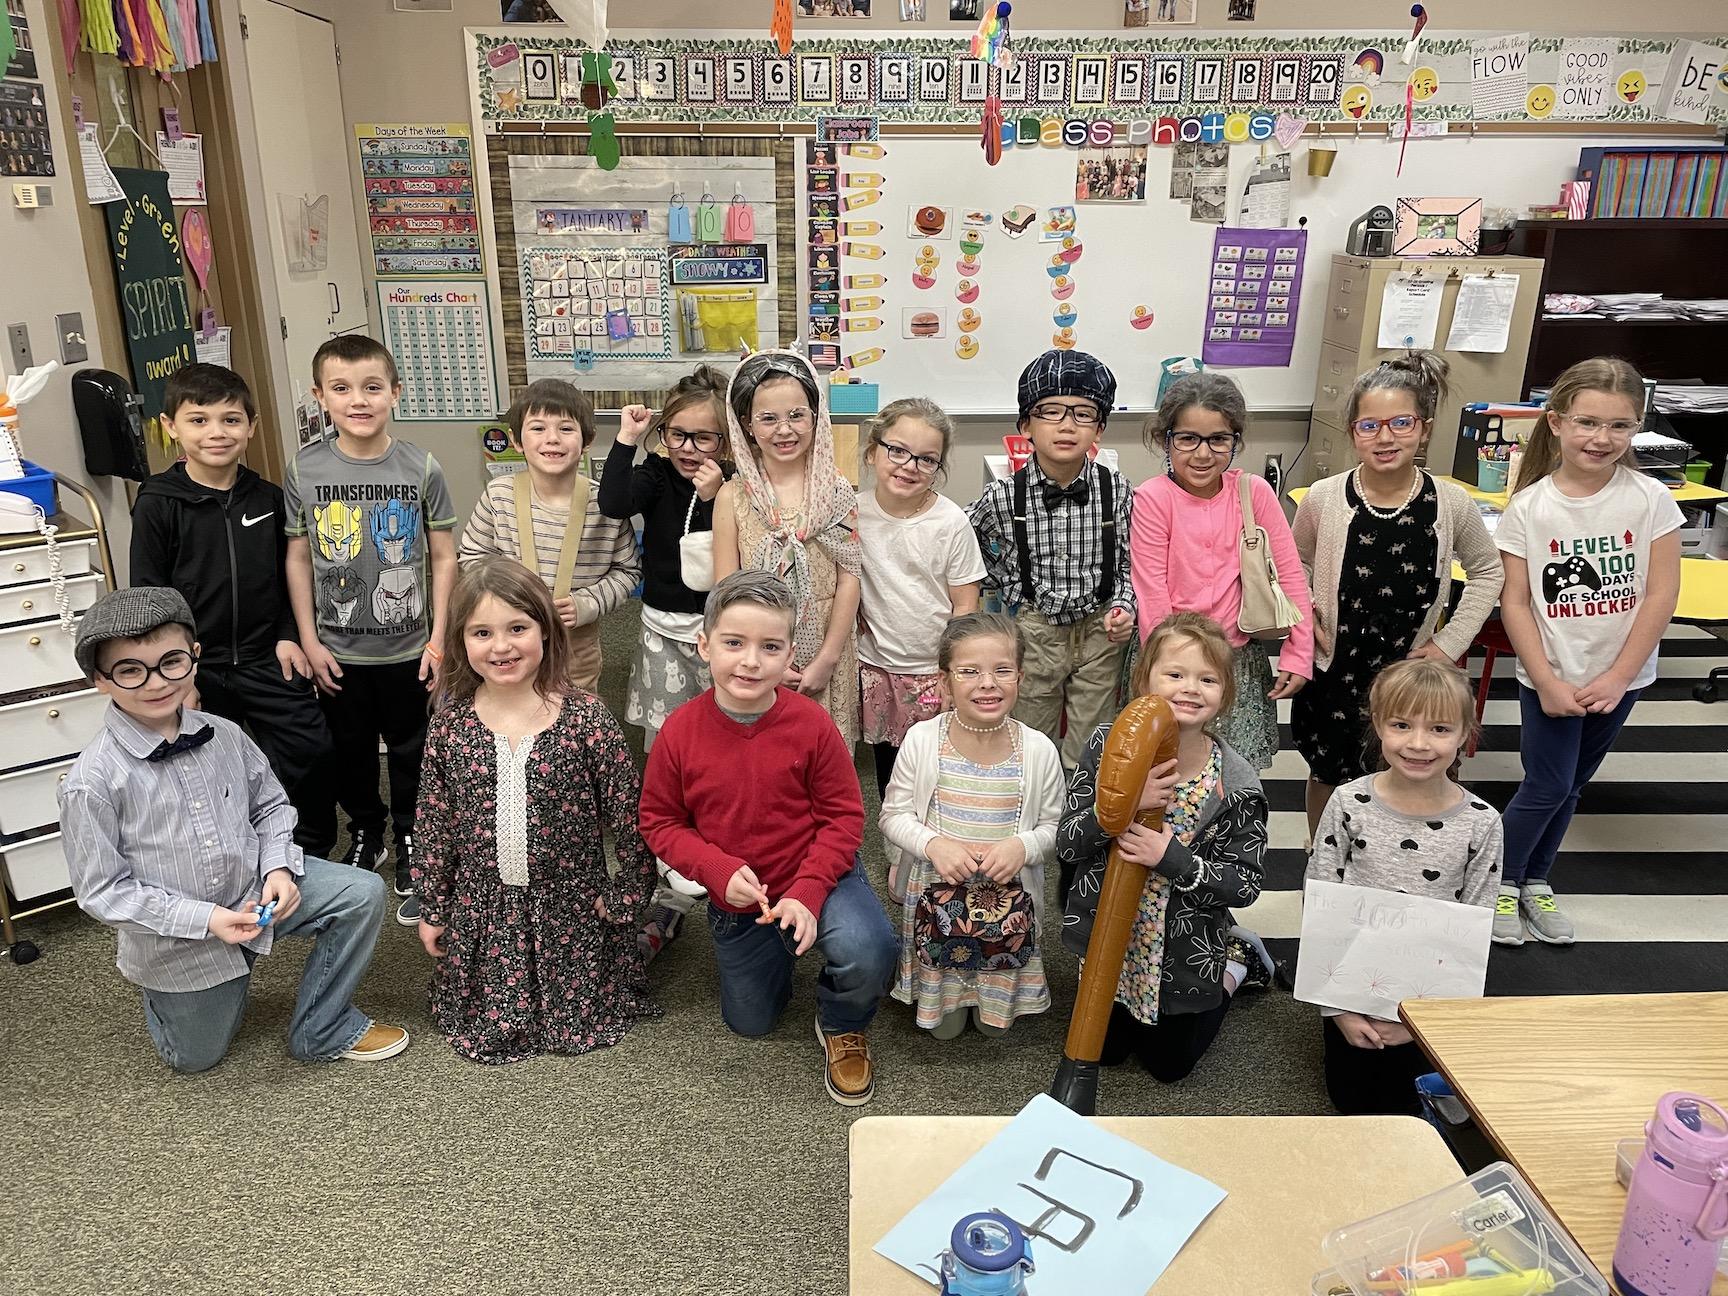 Mrs. Shogan’s first grade class at Level Green celebrated their 100th day by dressing as 100-year-olds